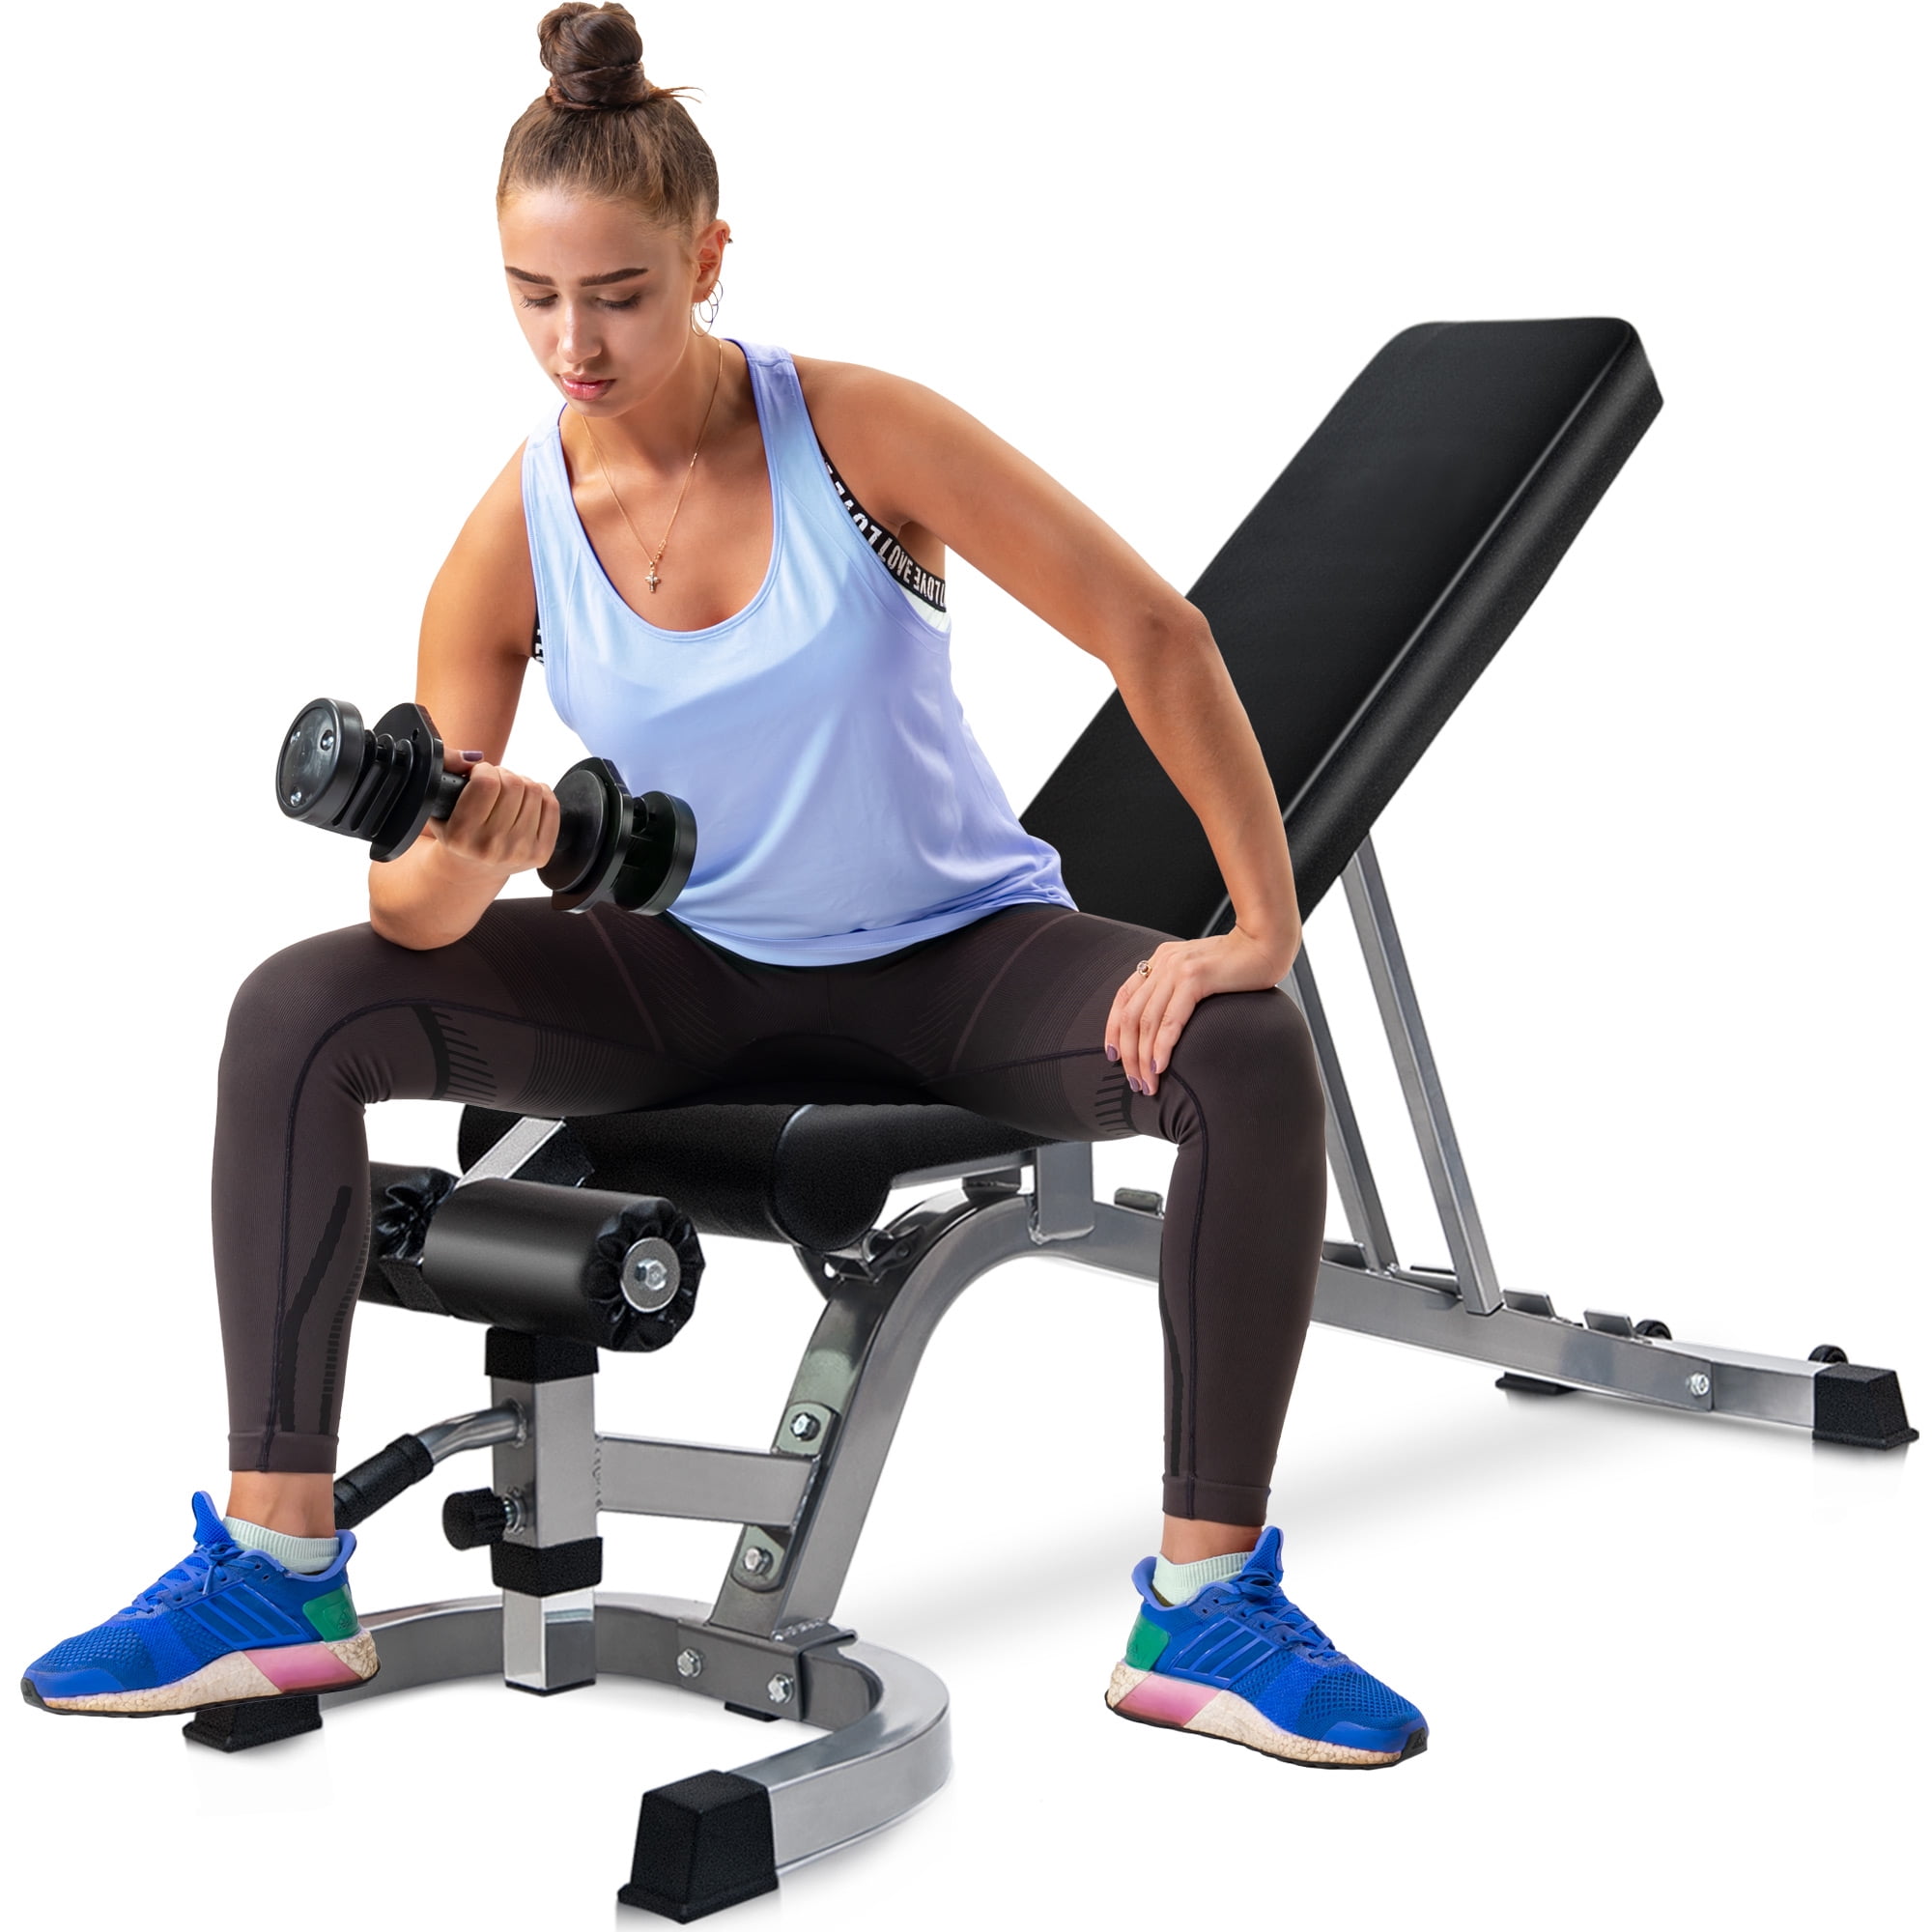 Adjustable Workout Weight Lifting Bench Sit-ups Board Foldable Dumbbell Bench US 